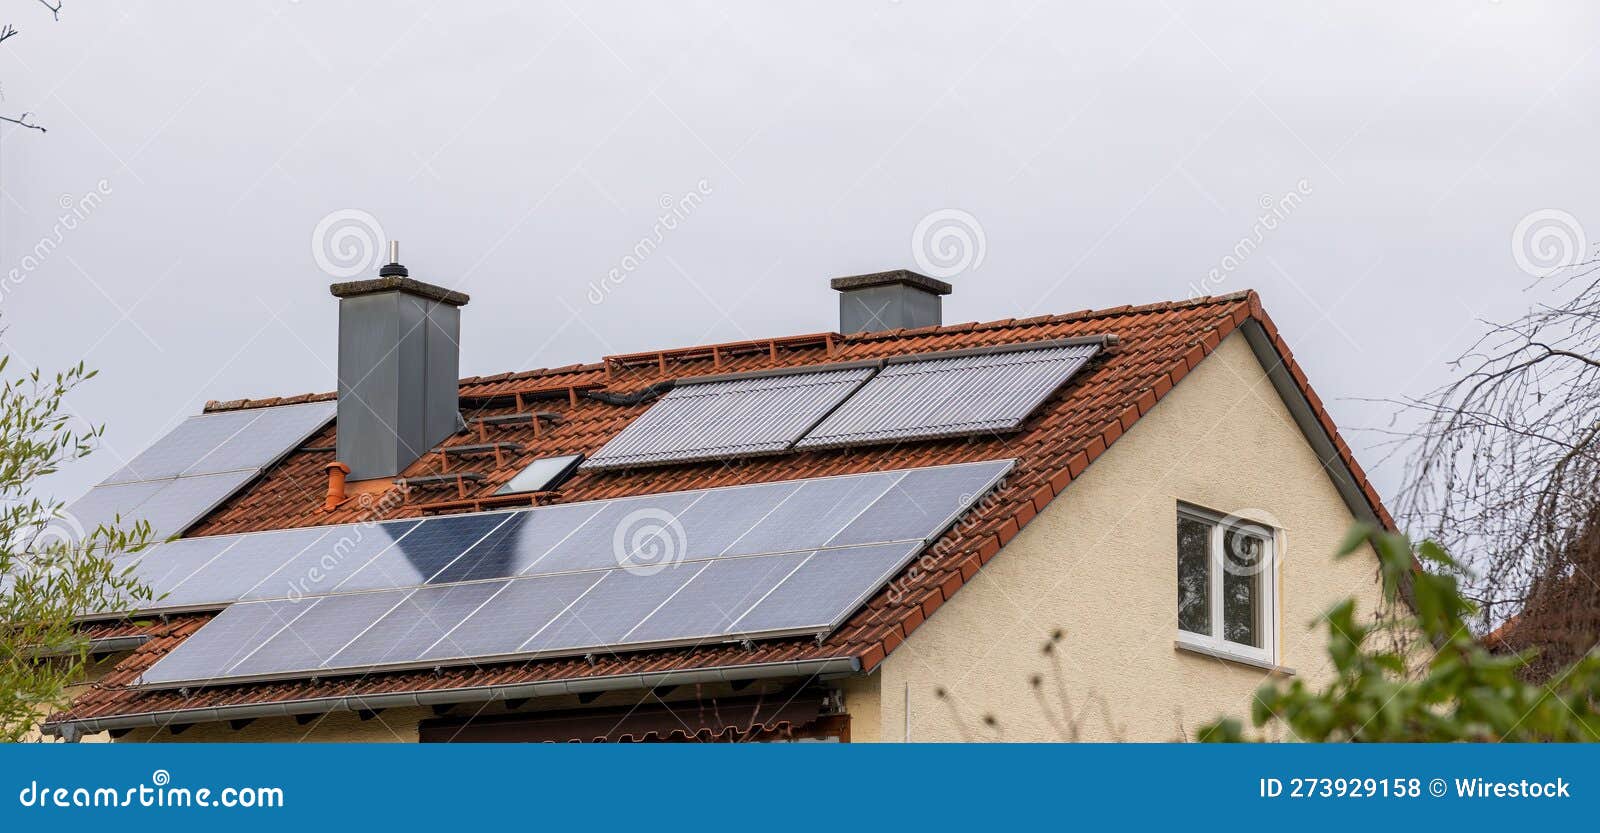 Federal Rebates Of Roofing Combined With Solar Project